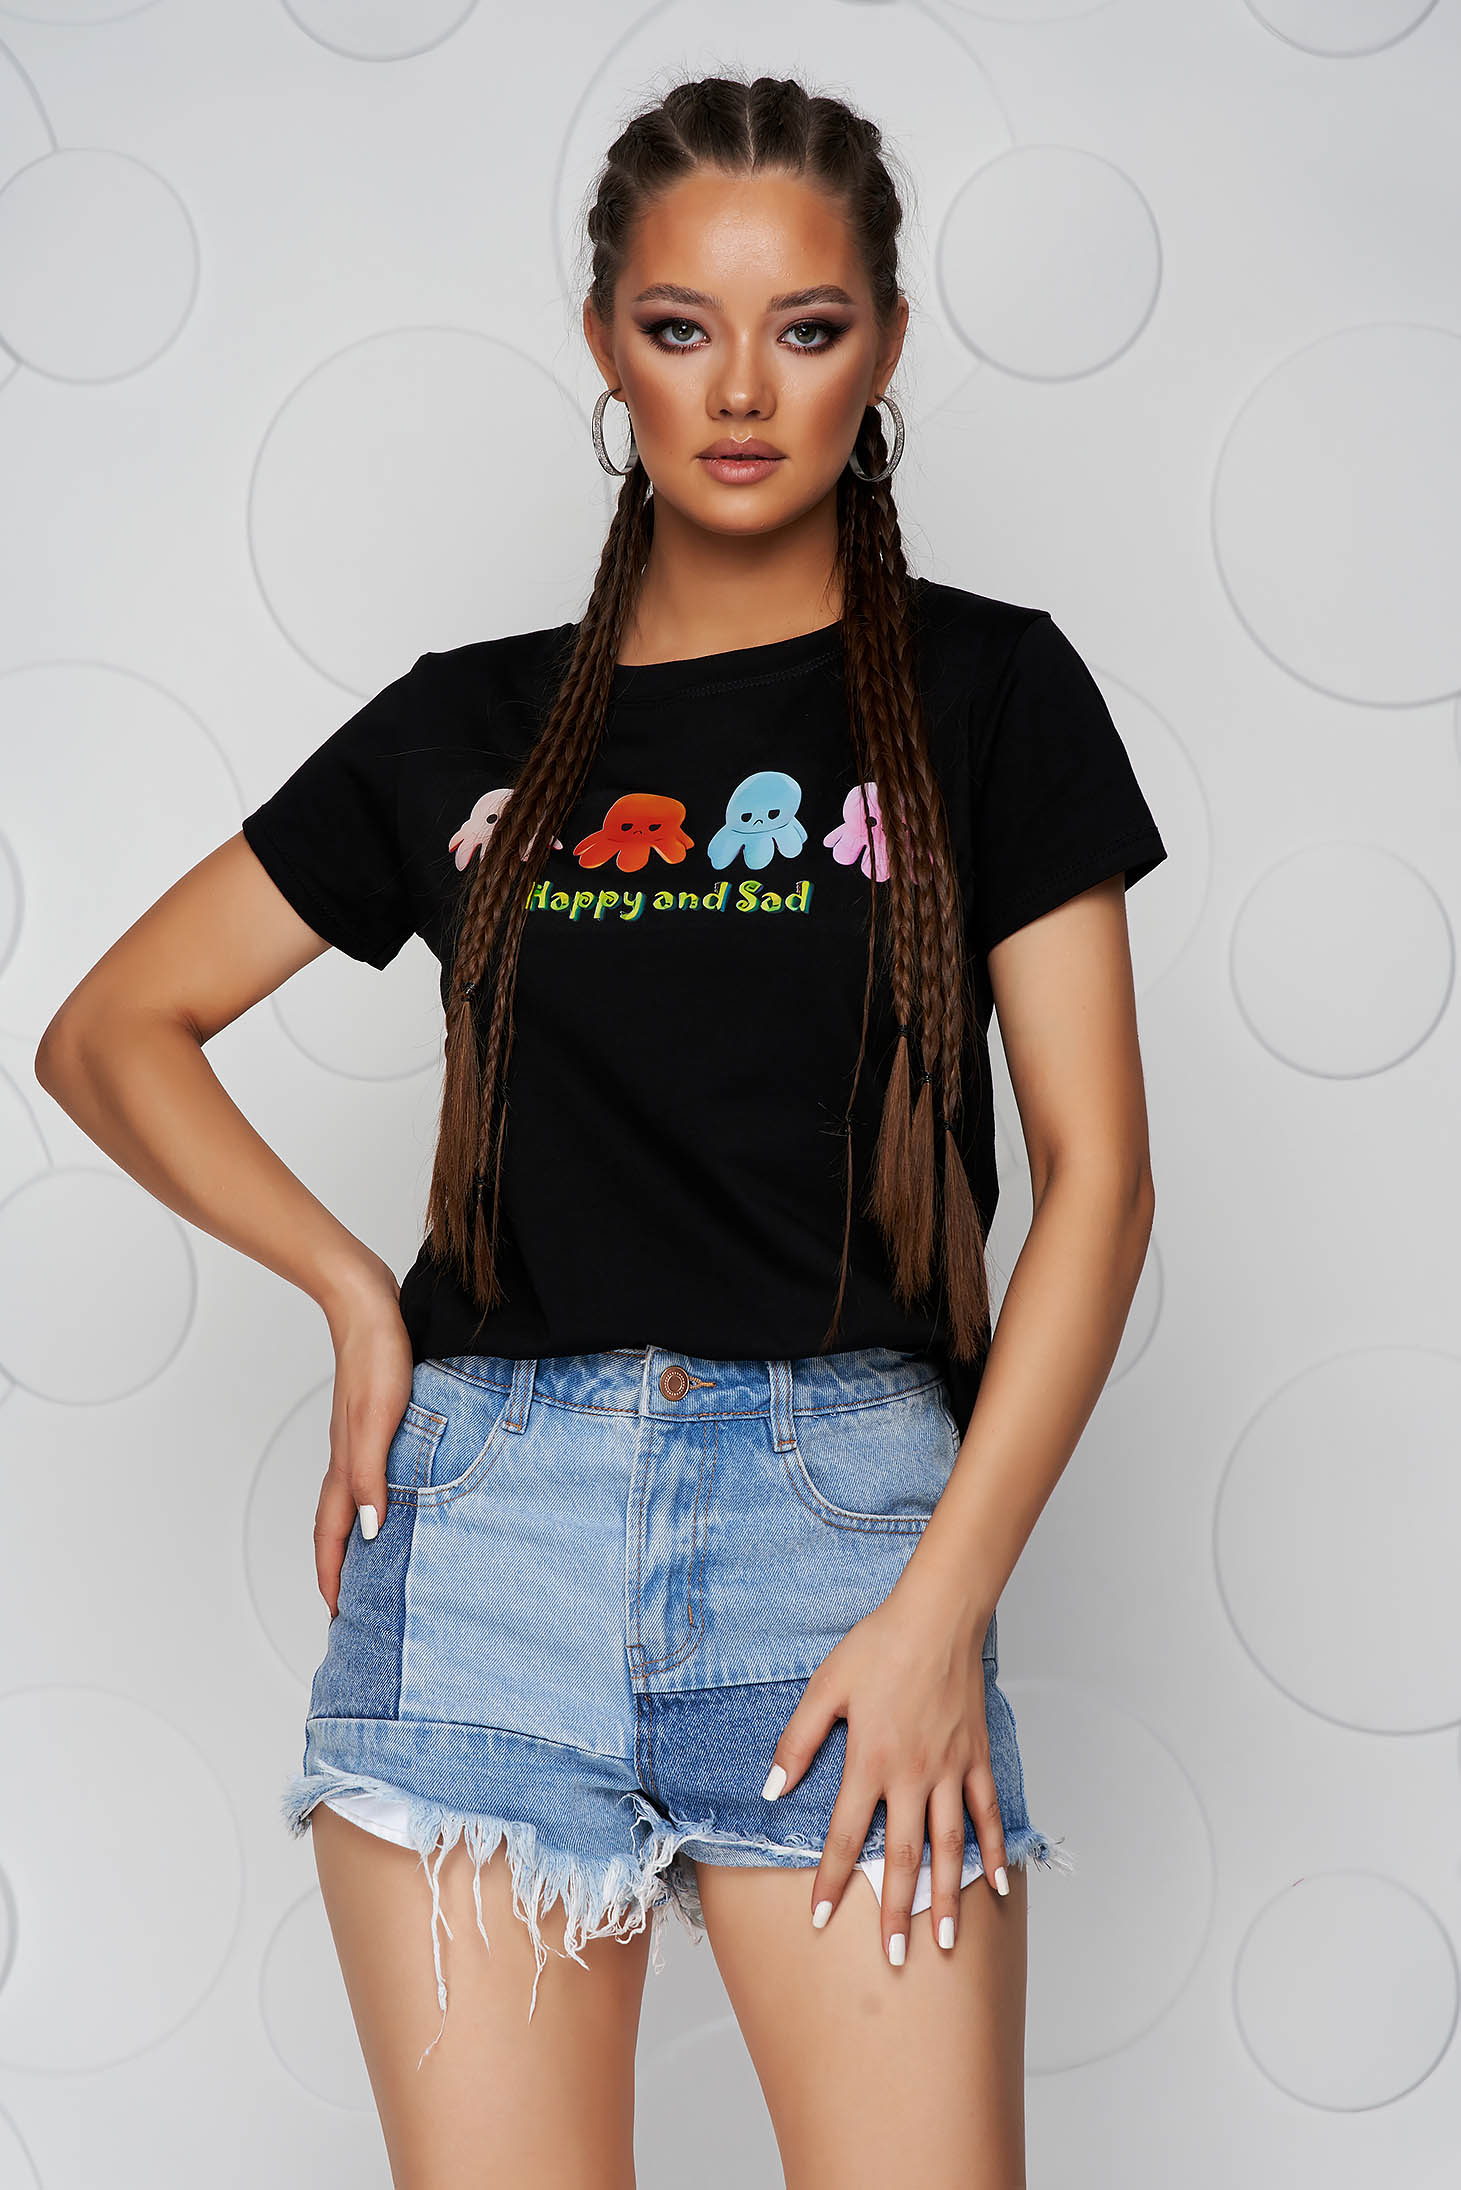 Black t-shirt loose fit cotton with rounded cleavage with graphic details